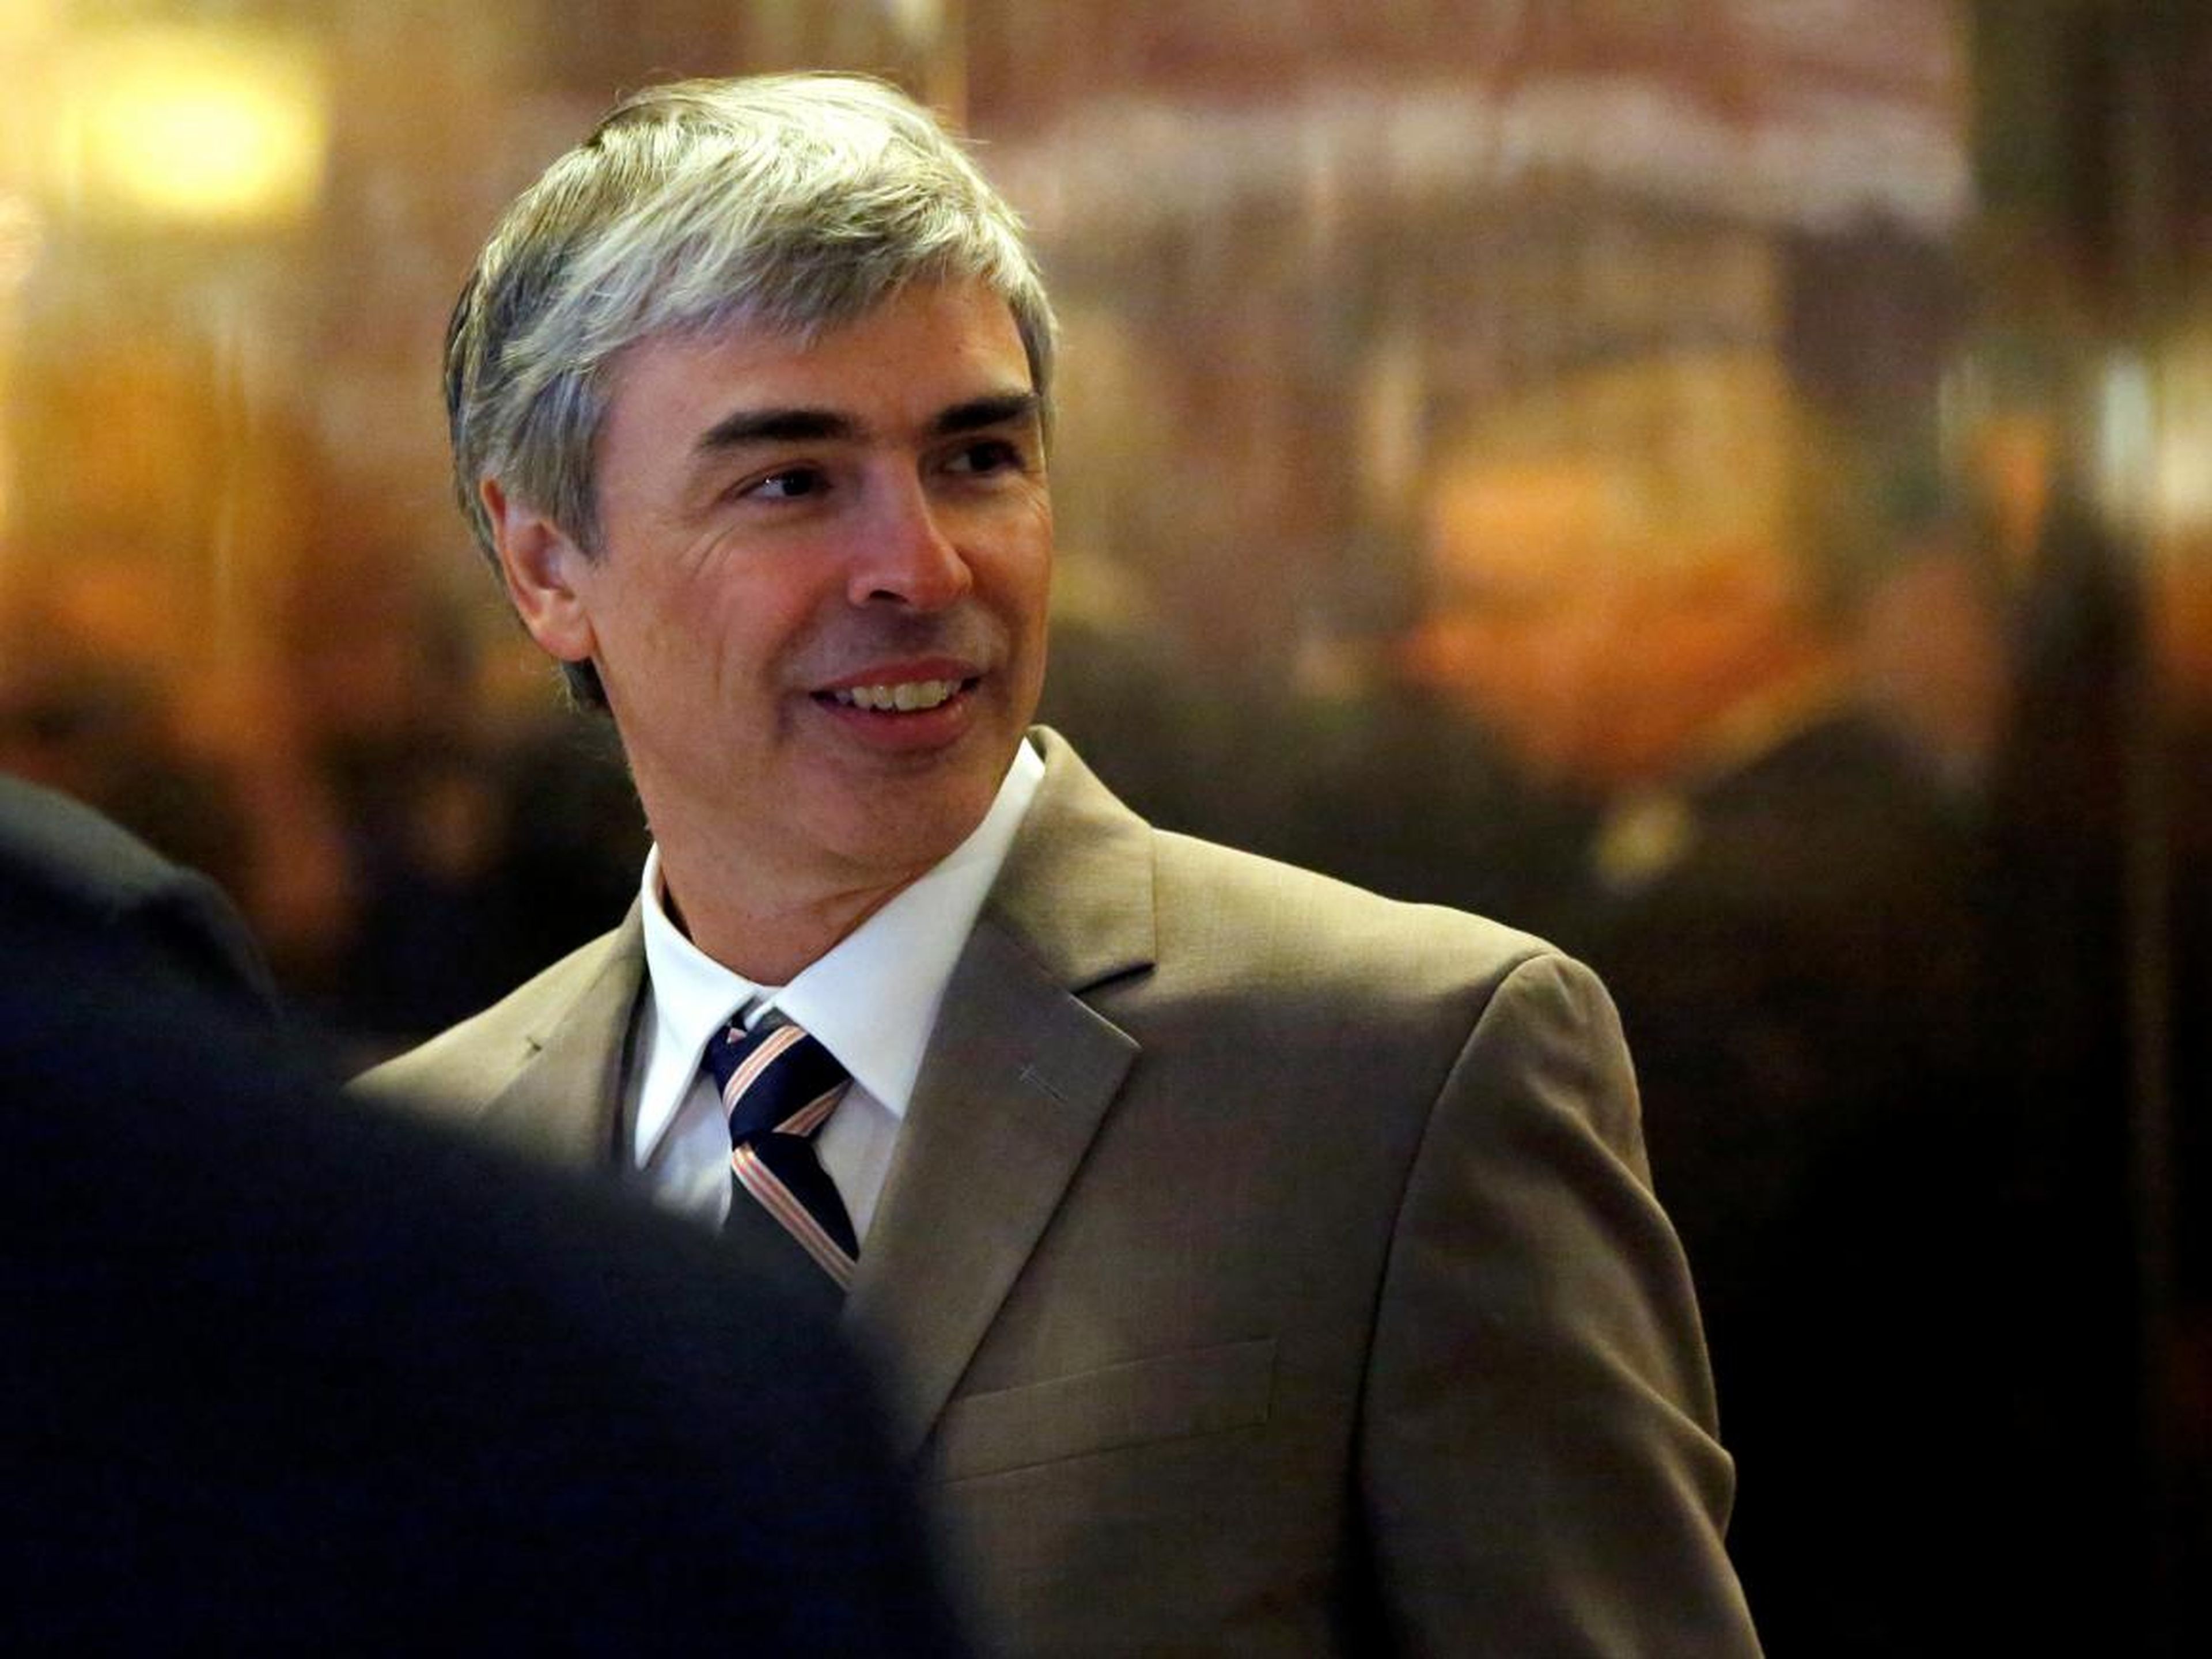 Larry Page, who cofounded Google with Sergey Brin.